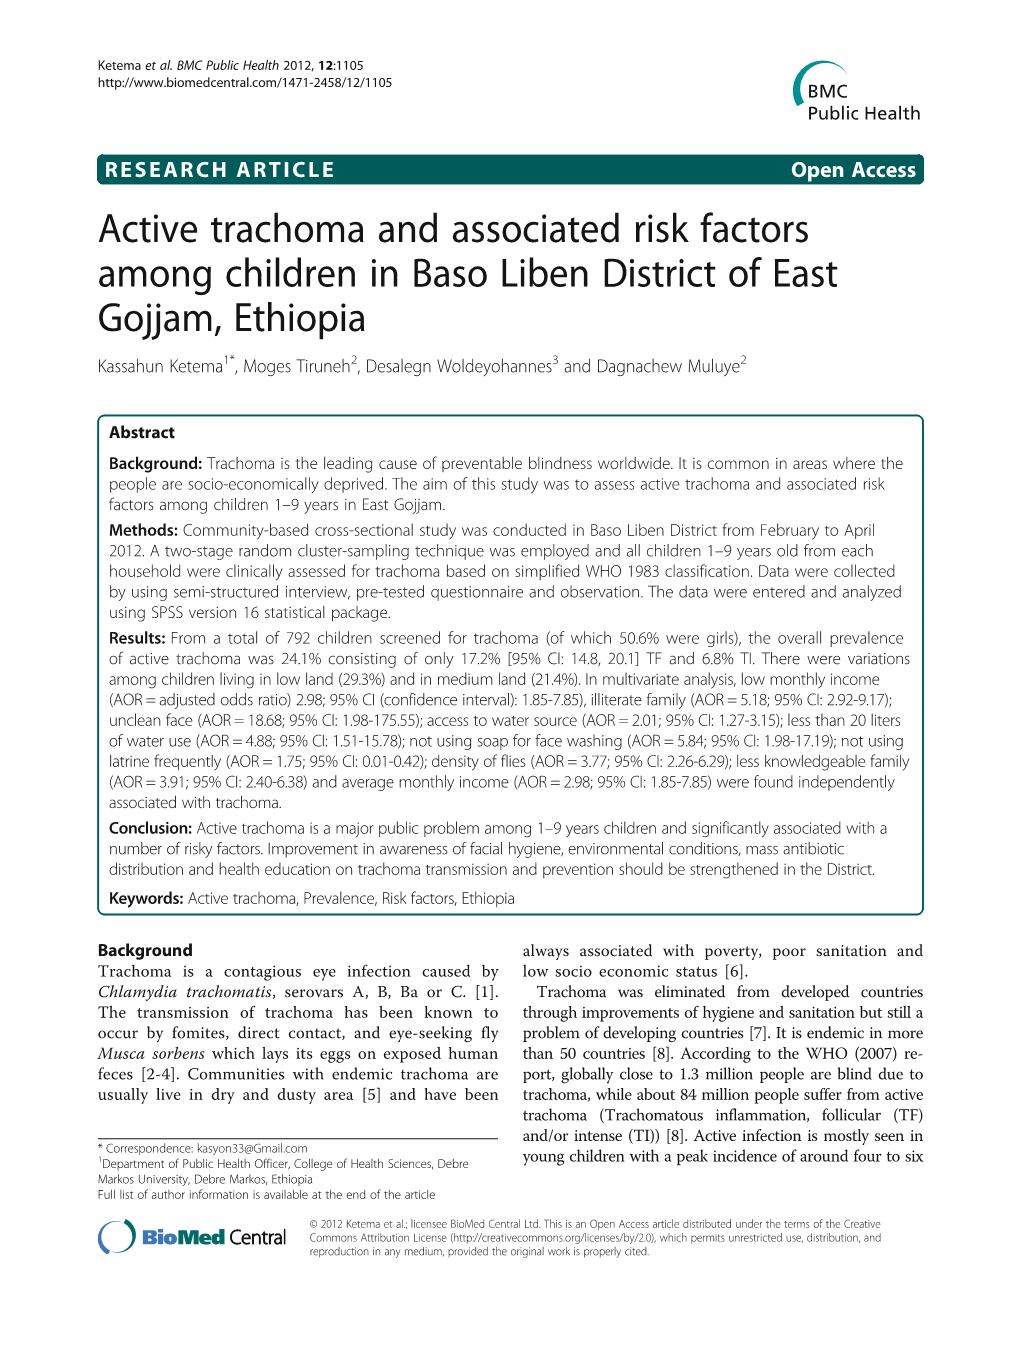 Active Trachoma and Associated Risk Factors Among Children in Baso Liben District of East Gojjam, Ethiopia